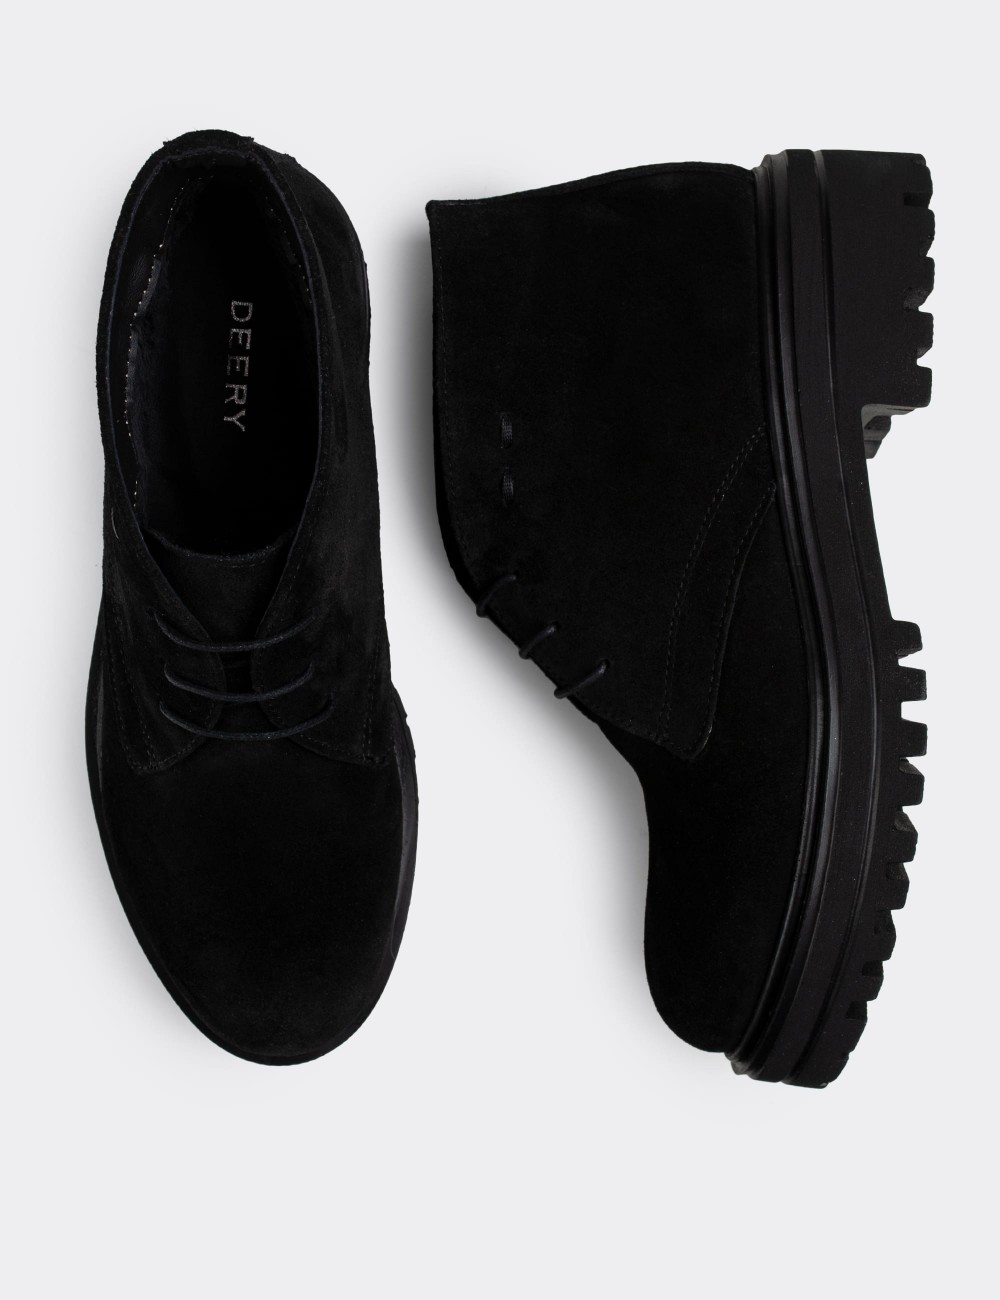 Black Suede Leather Desert Boots - 01847ZSYHE02